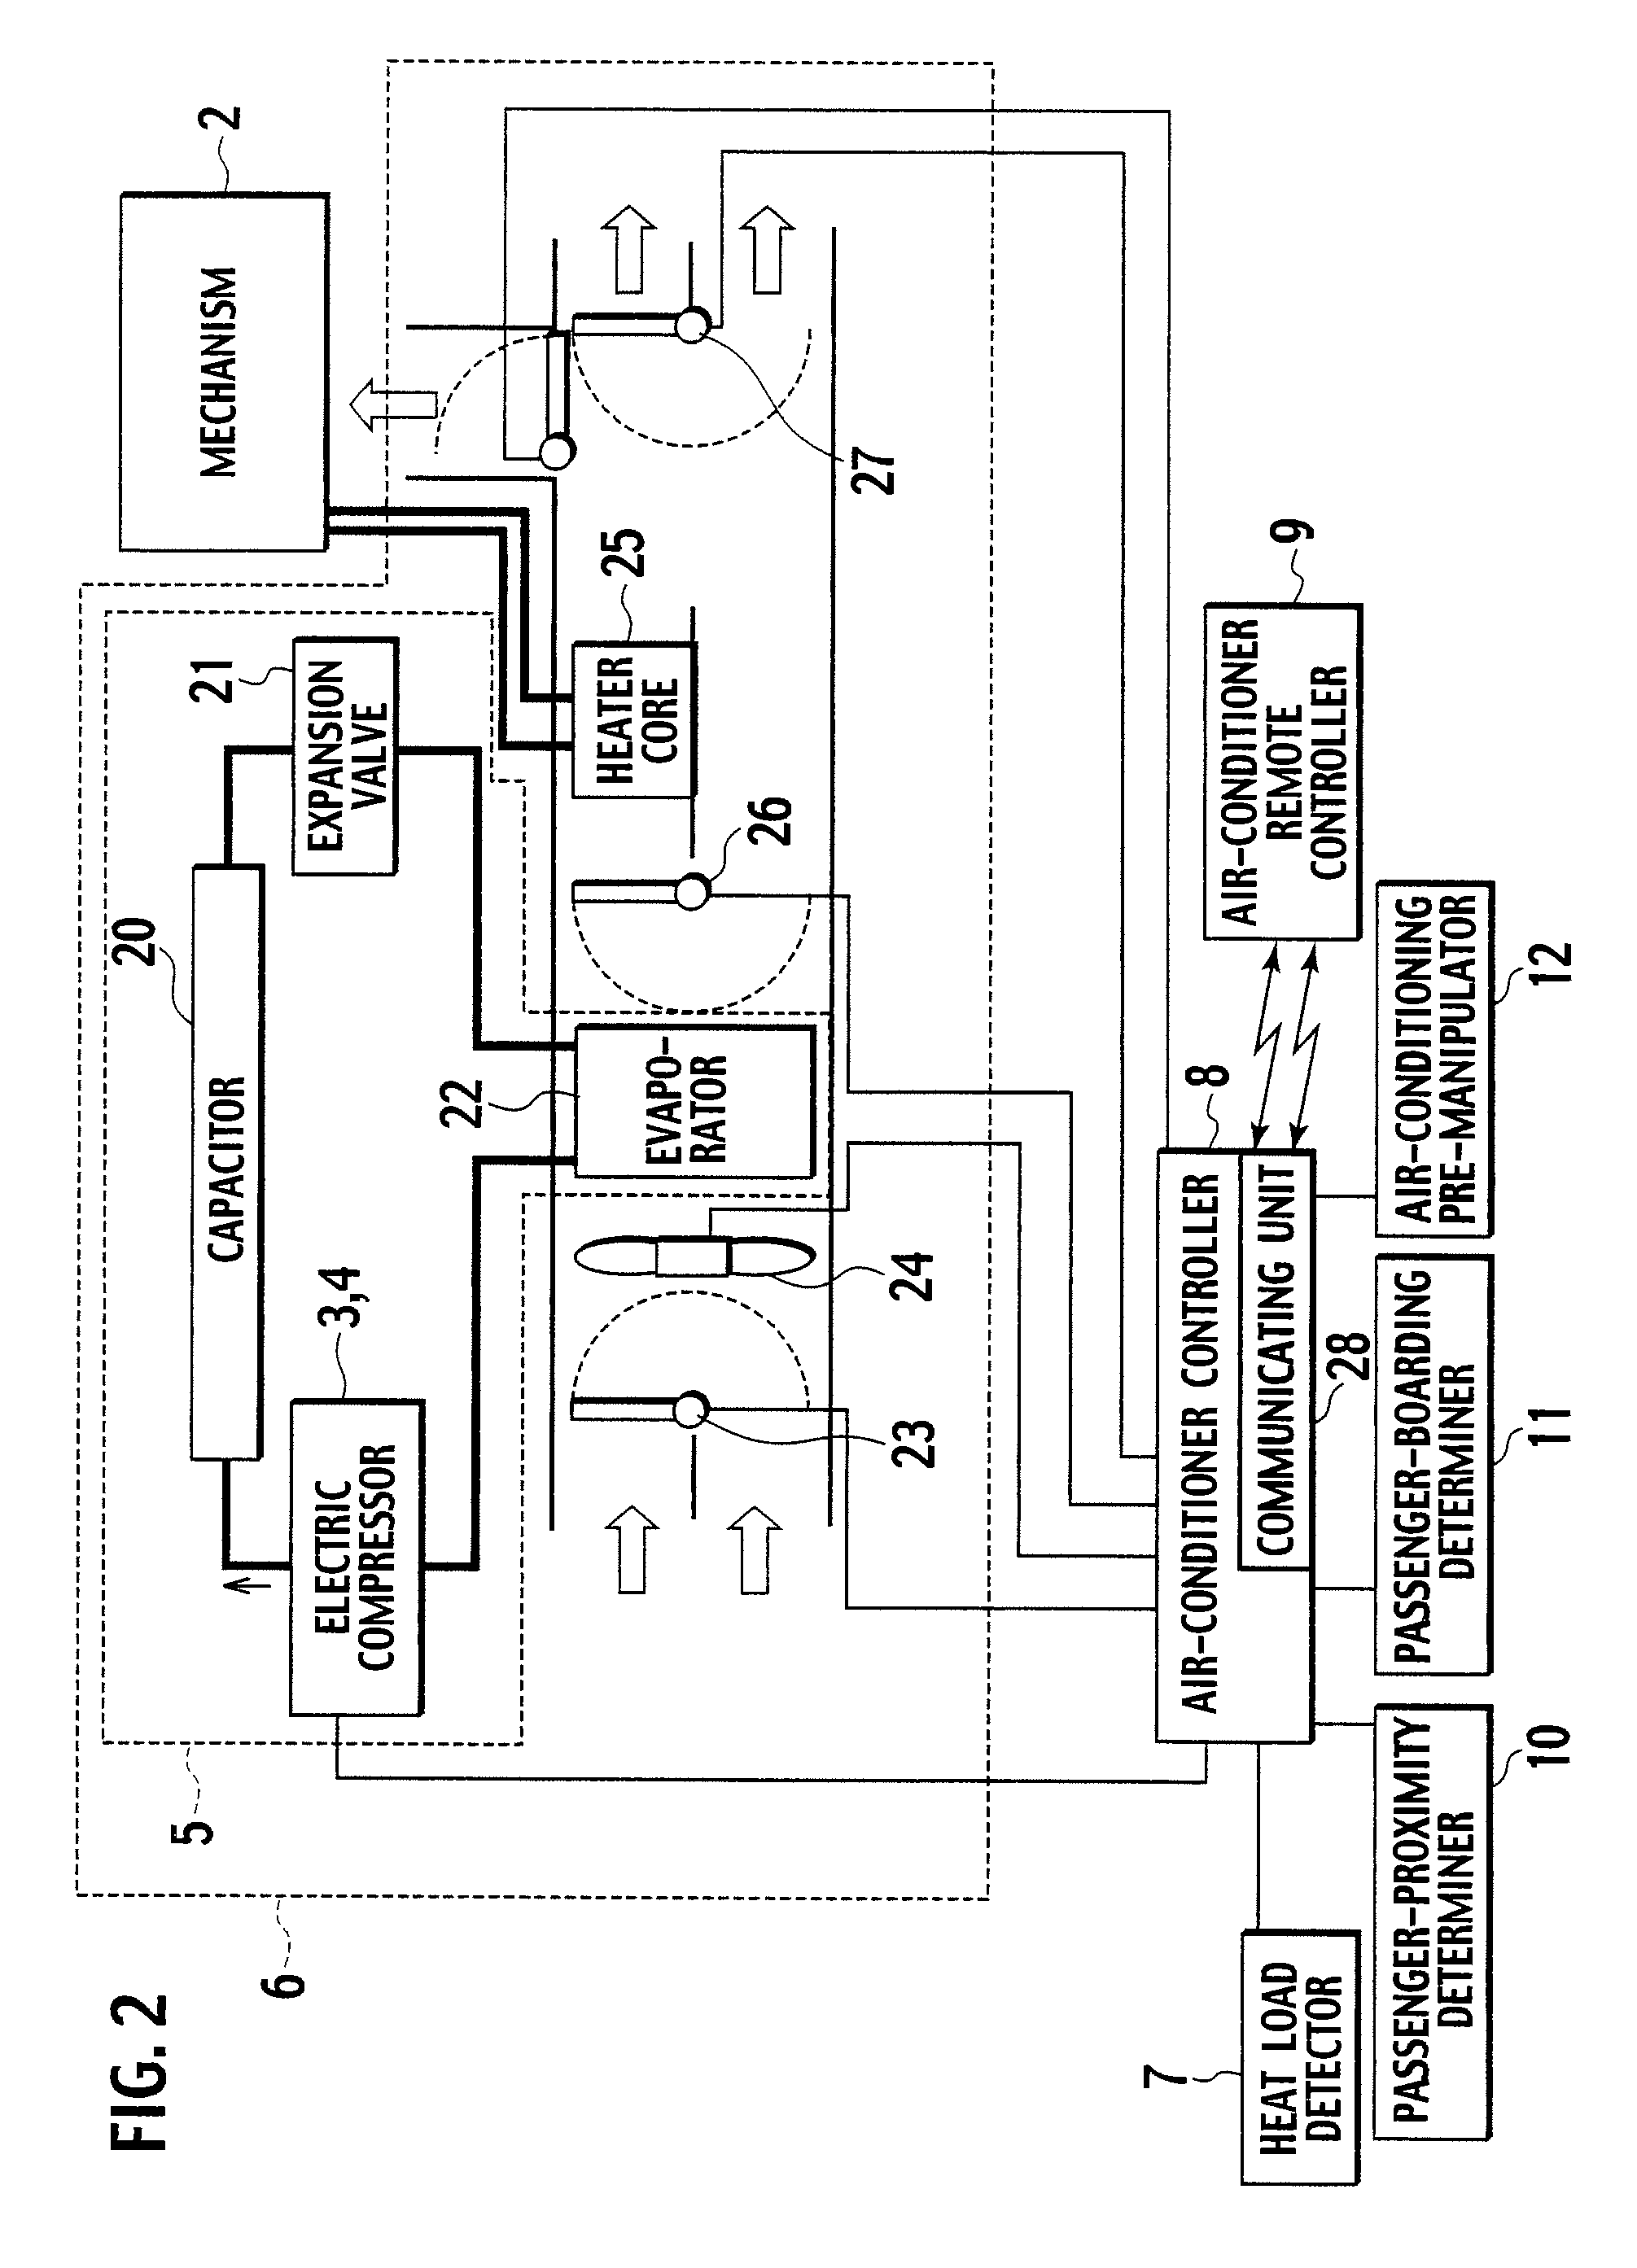 Vehicle air-conditioner control system